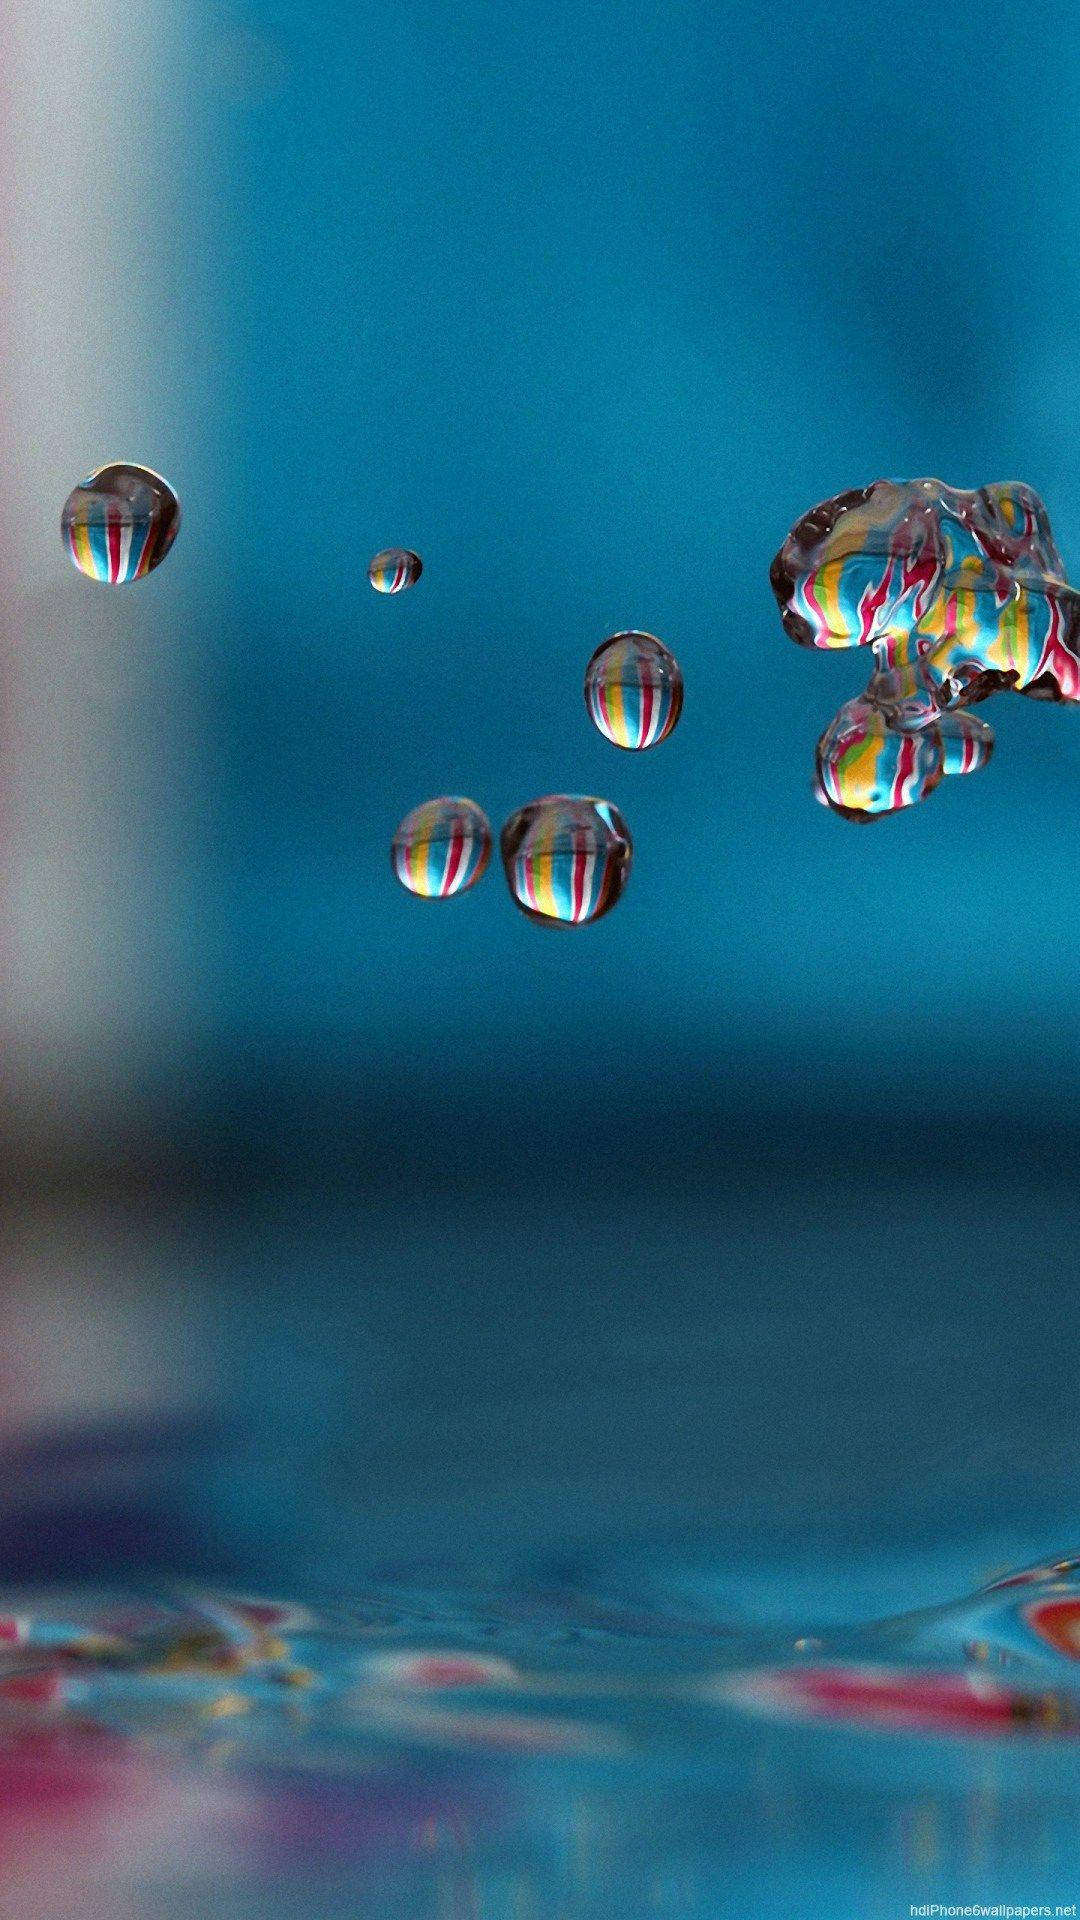 Water Droplets Iphone Live Wallpaper